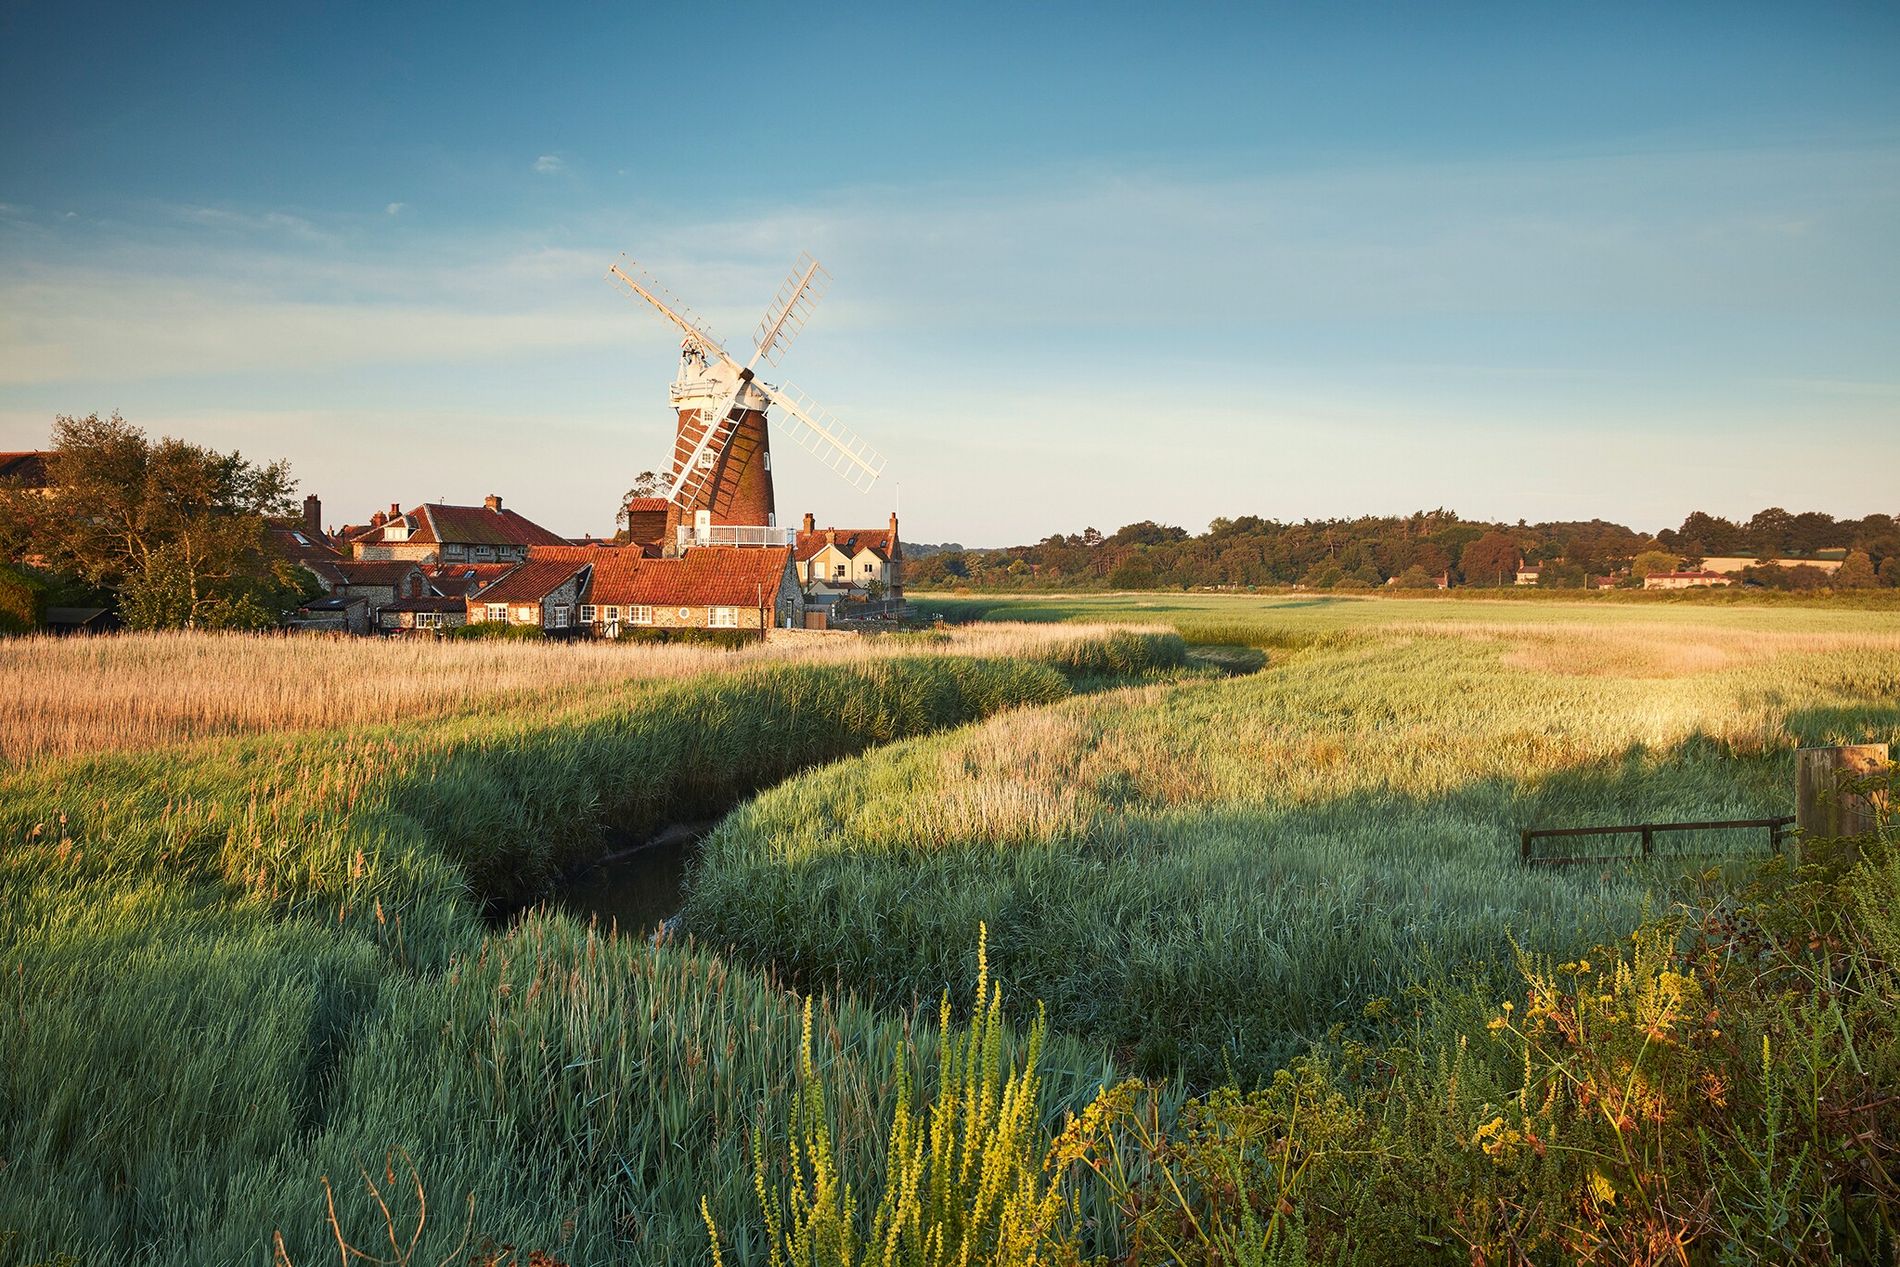 Cley Windmill, Cley next the Sea, Norfolk, England